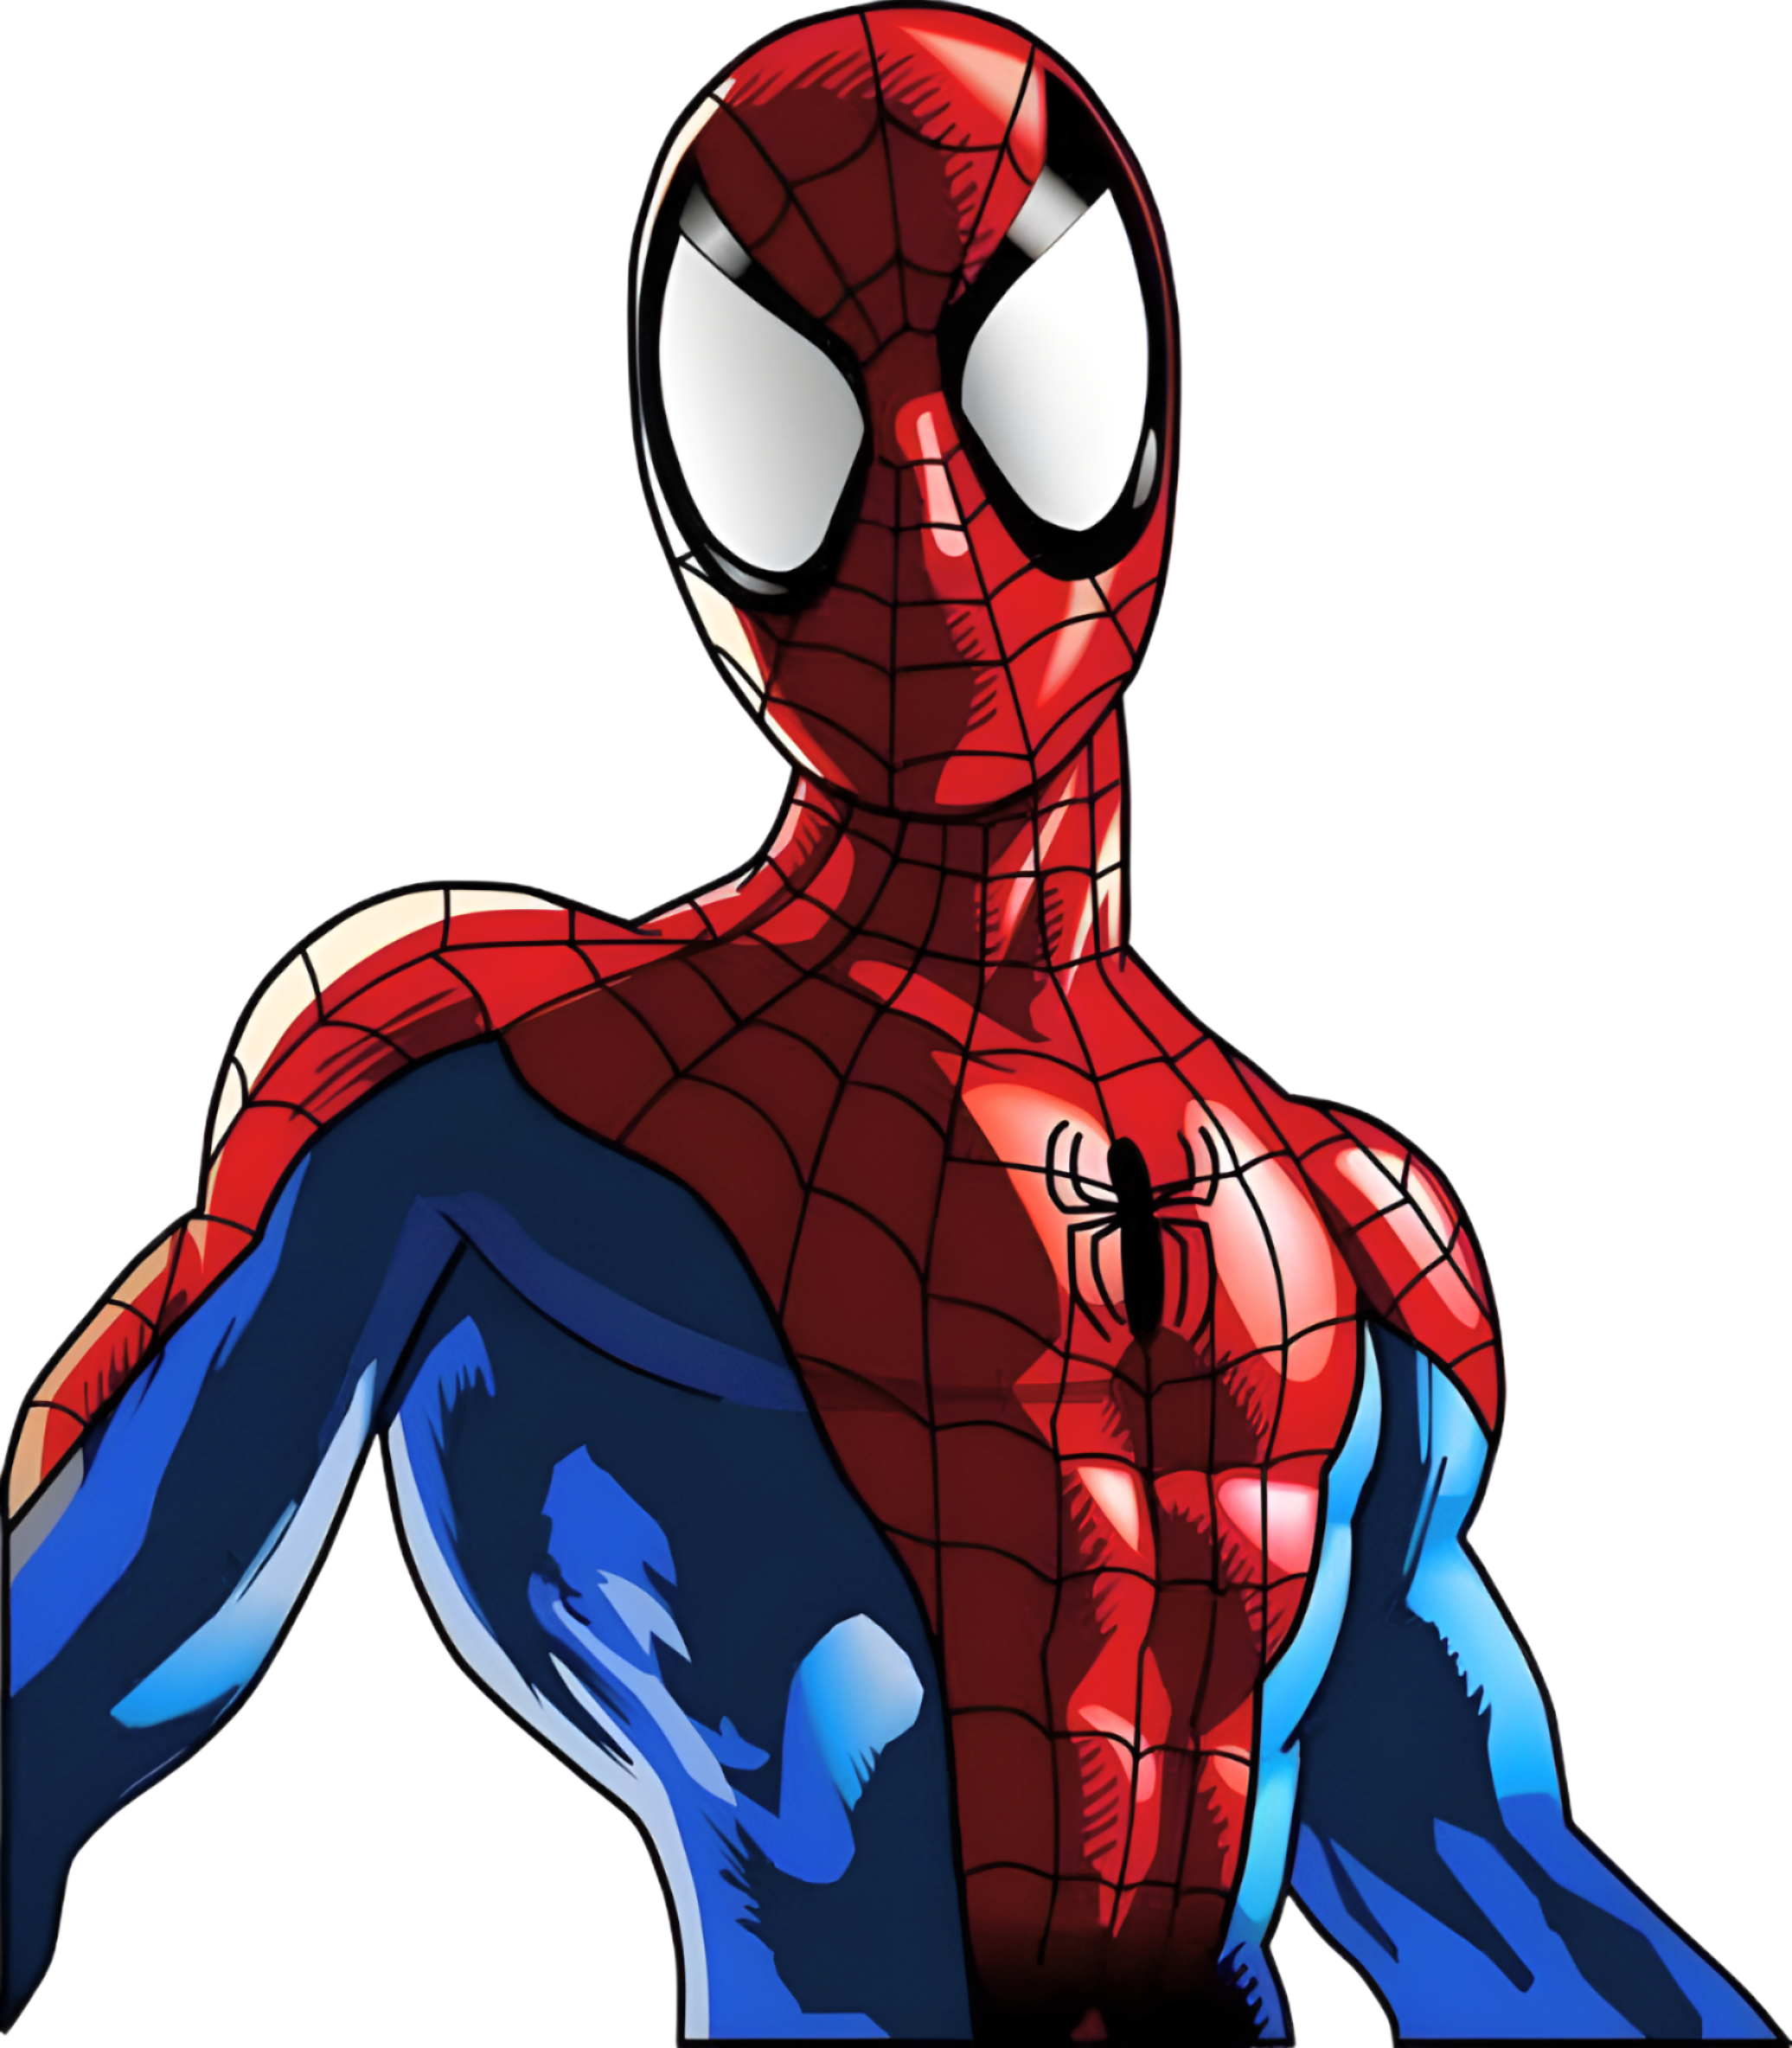 Ultimate Spiderman Render by marcopolo157 on DeviantArt